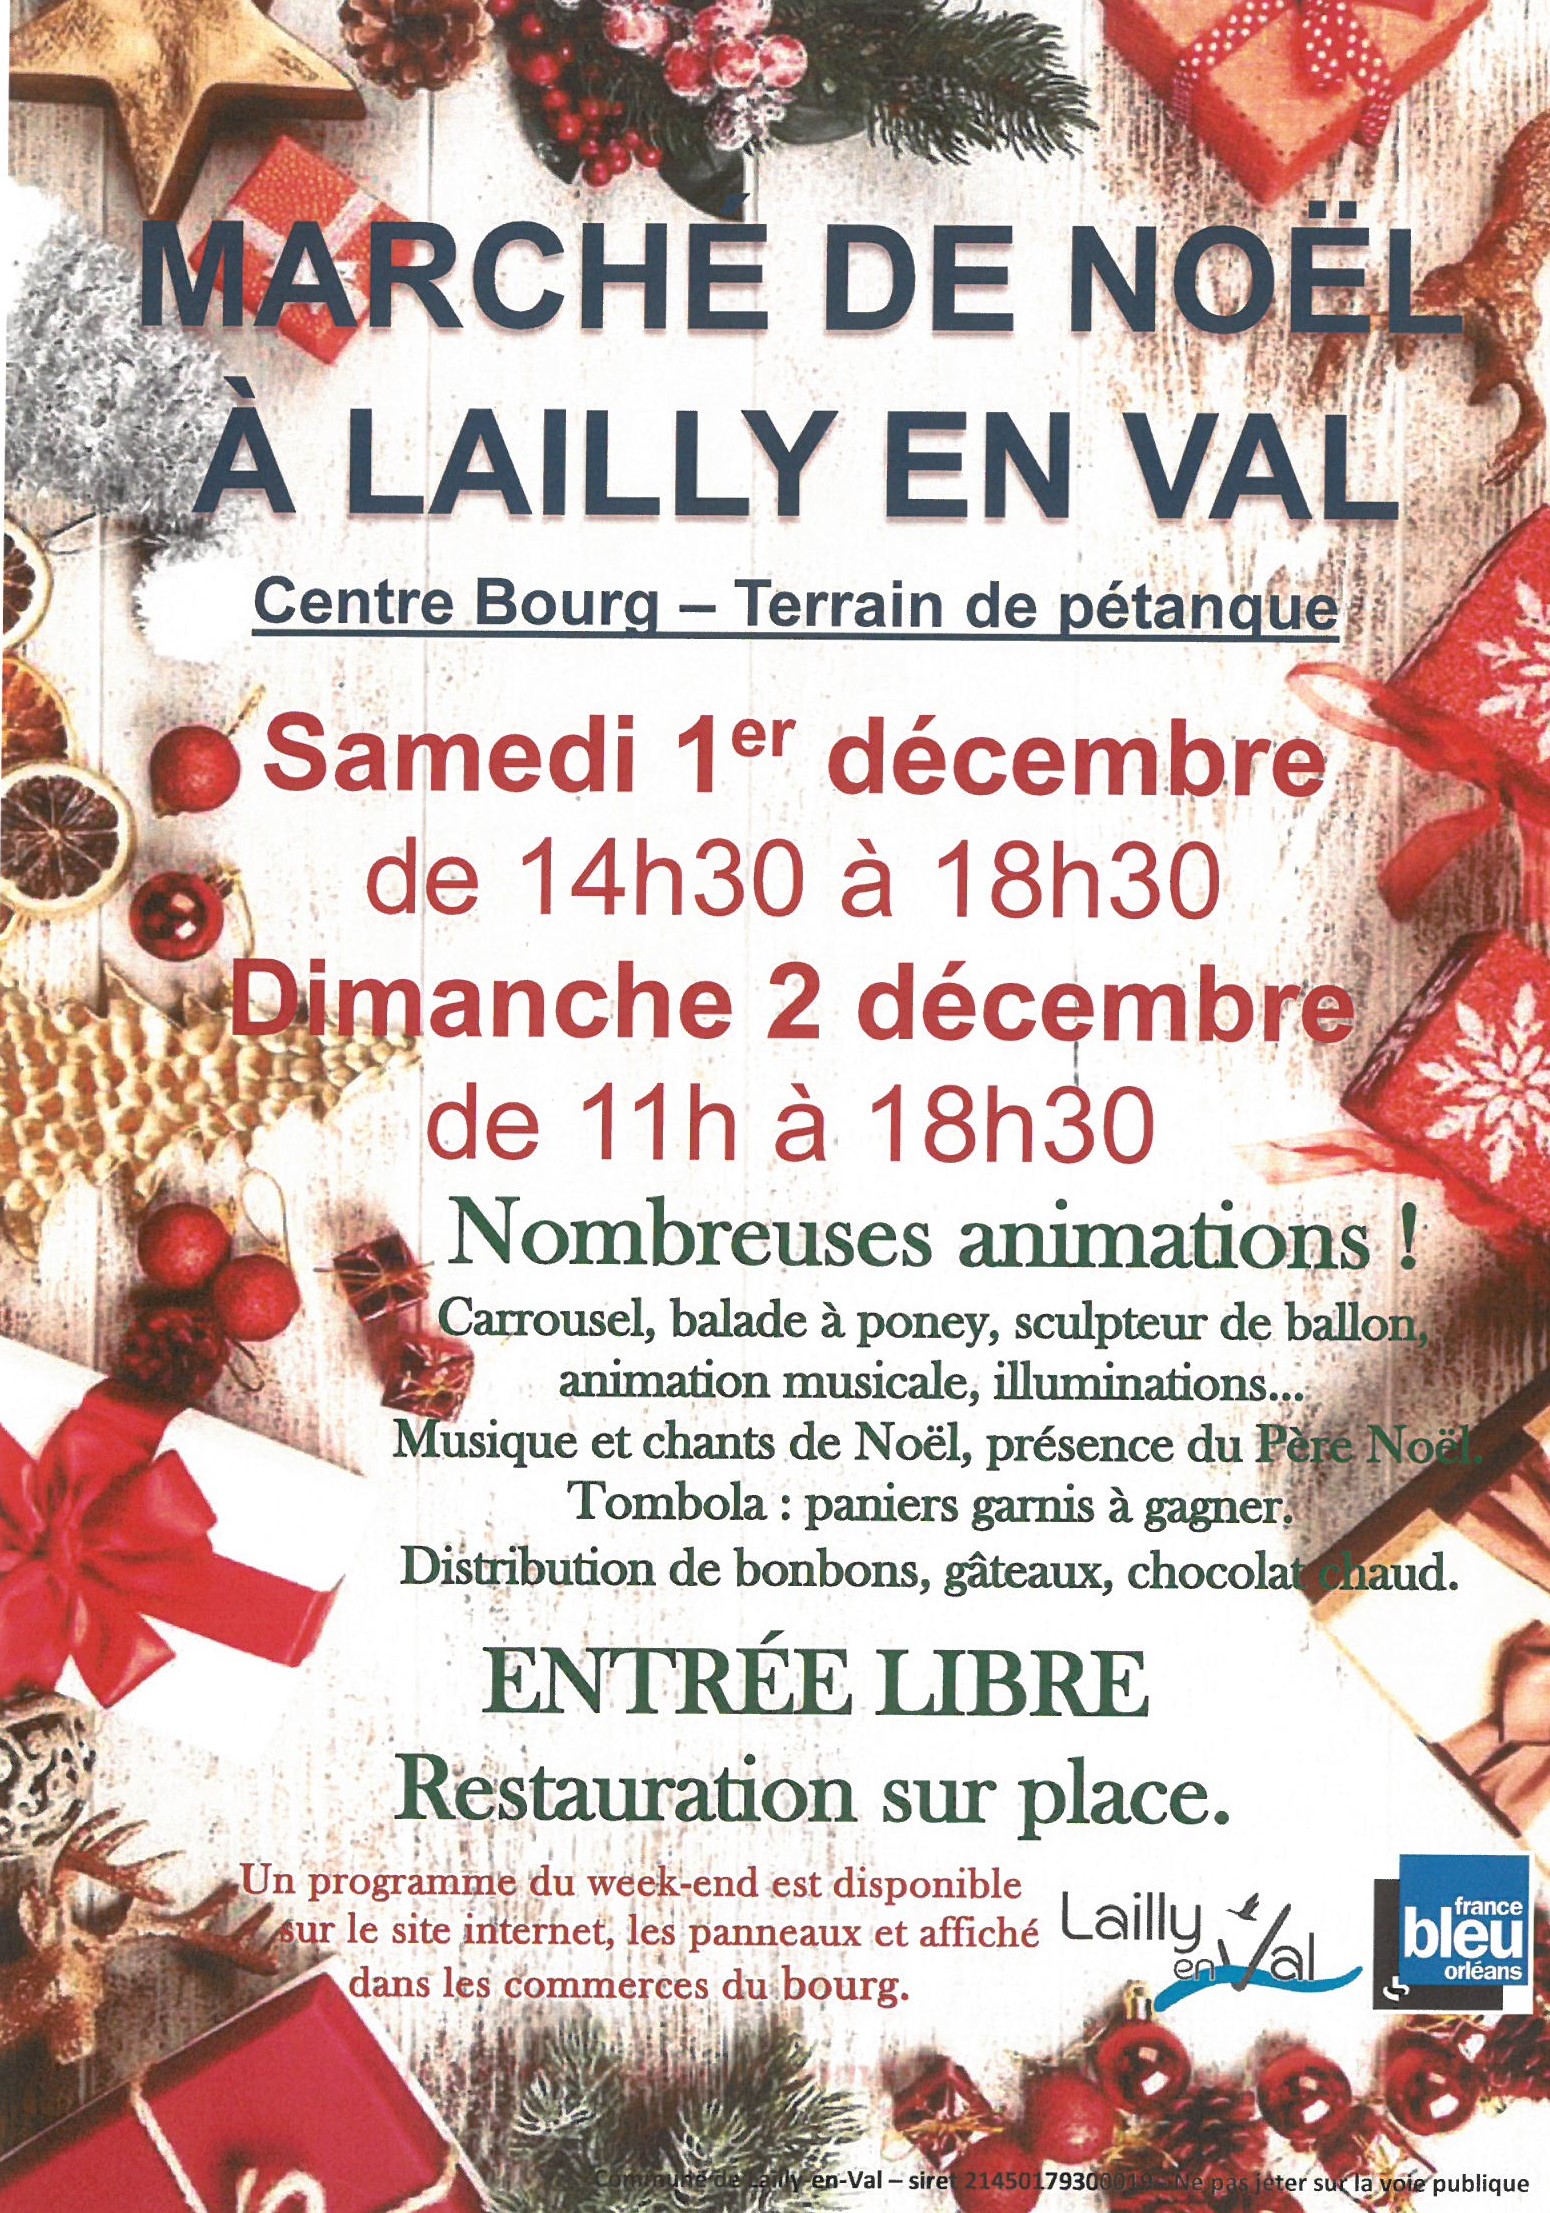 Marche noel Lailly